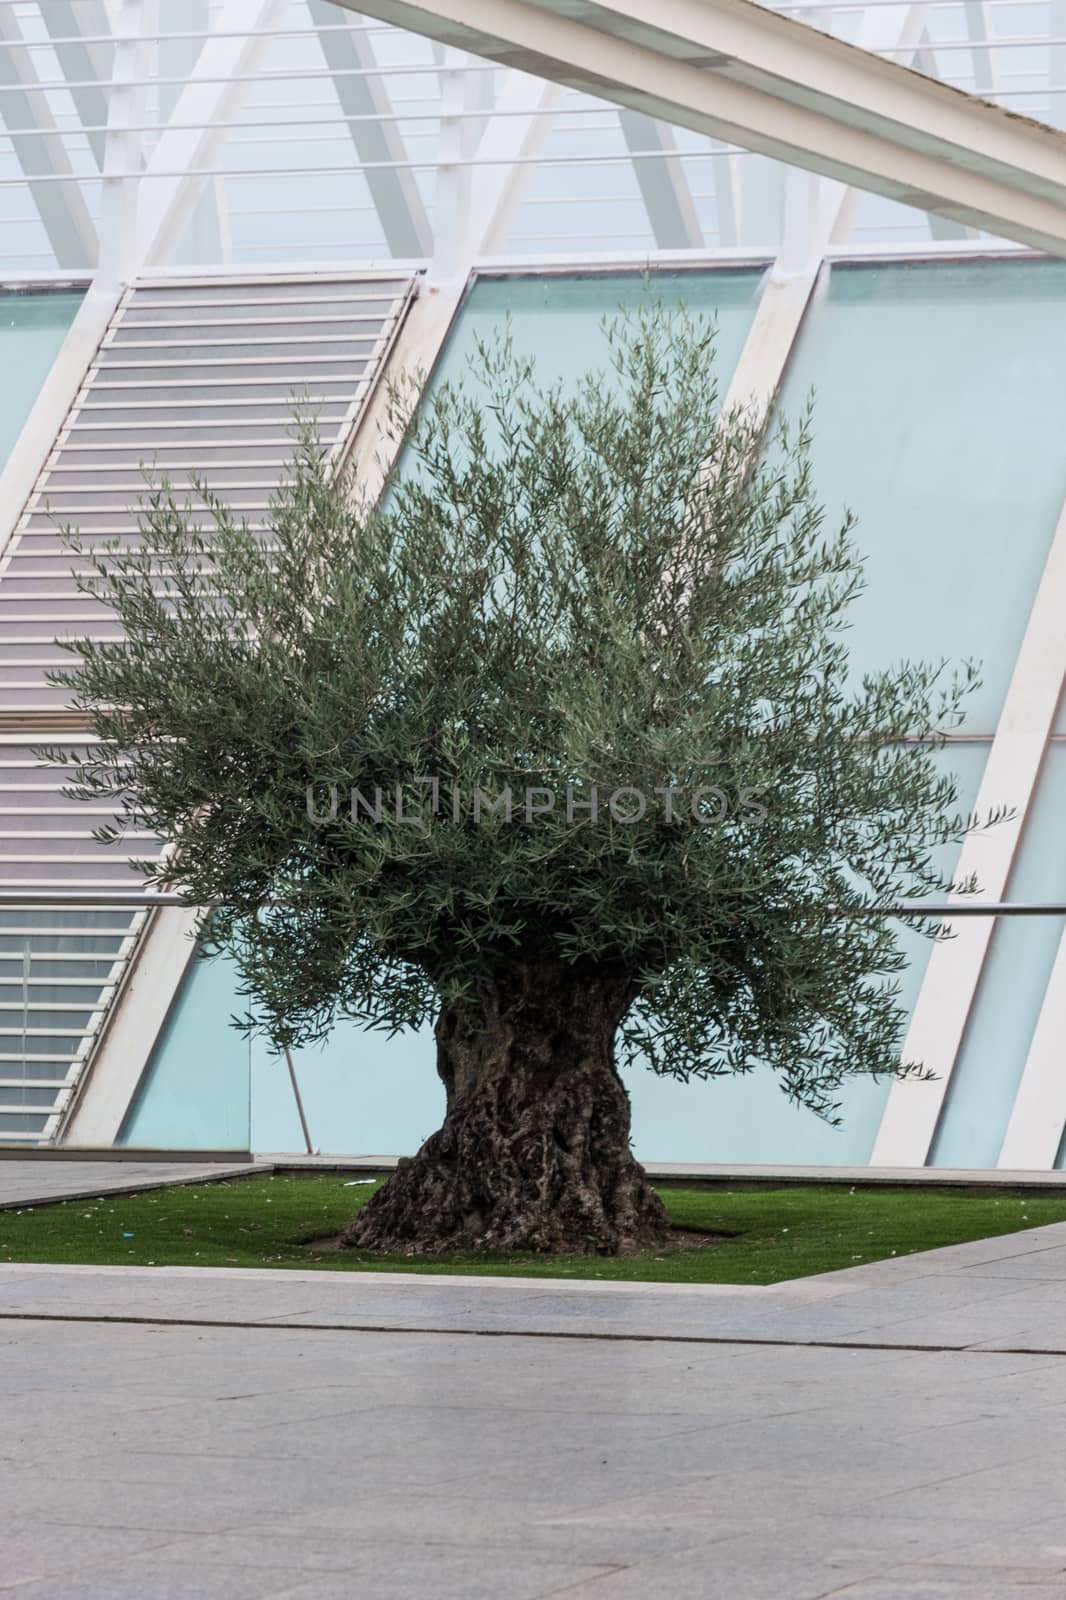 Extremely old olive tree surrounded by modern